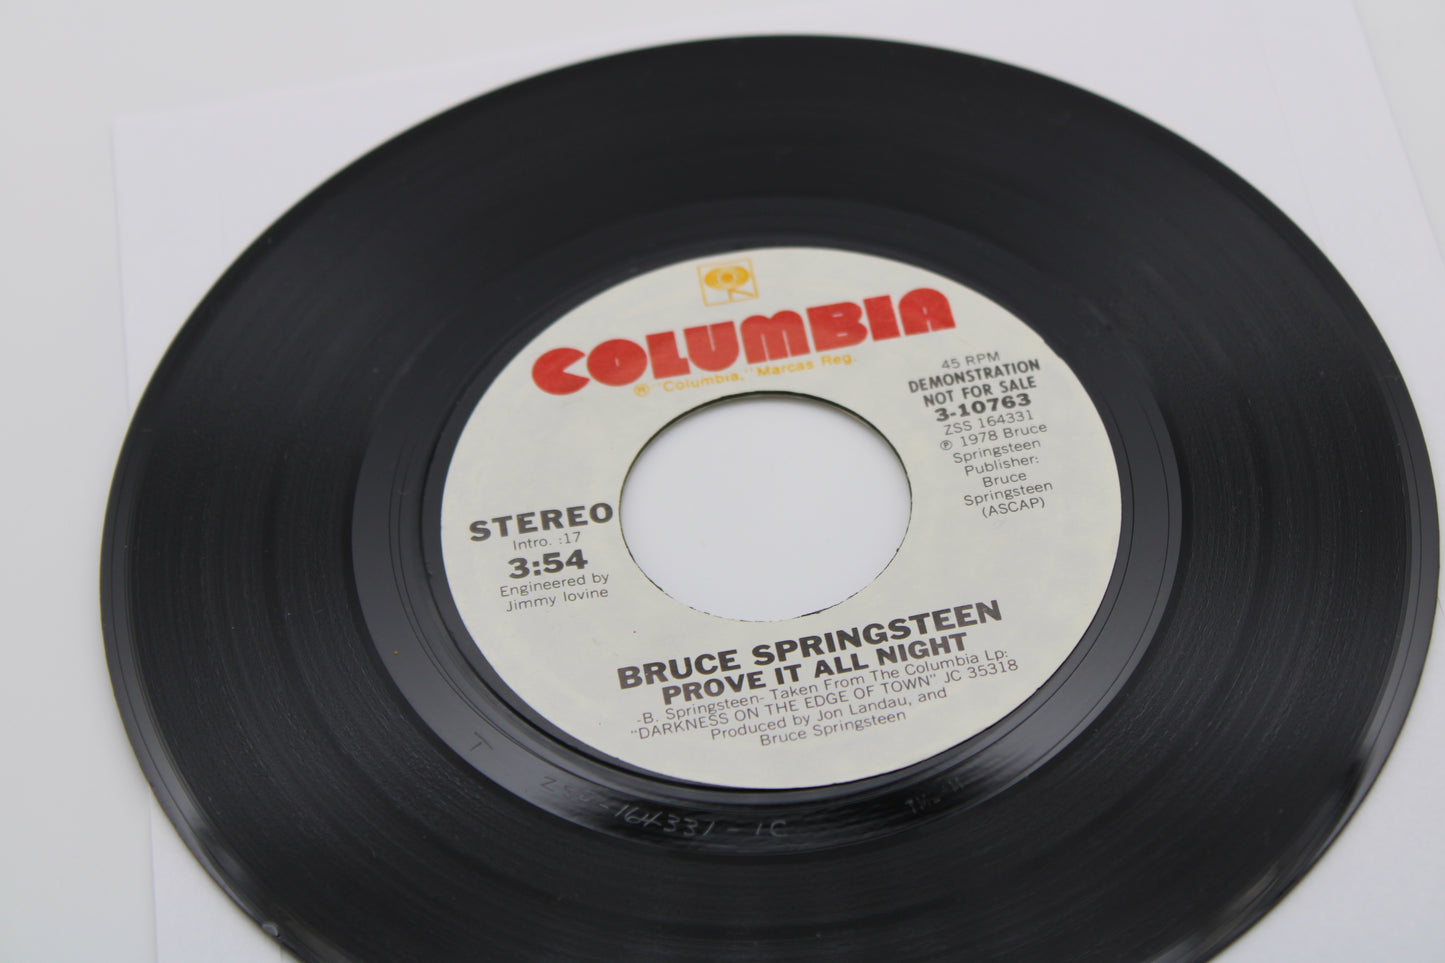 Bruce Springsteen 45 Record "PROVE IT ALL NIGHT" Demonstration Not For Sale vinyl Release